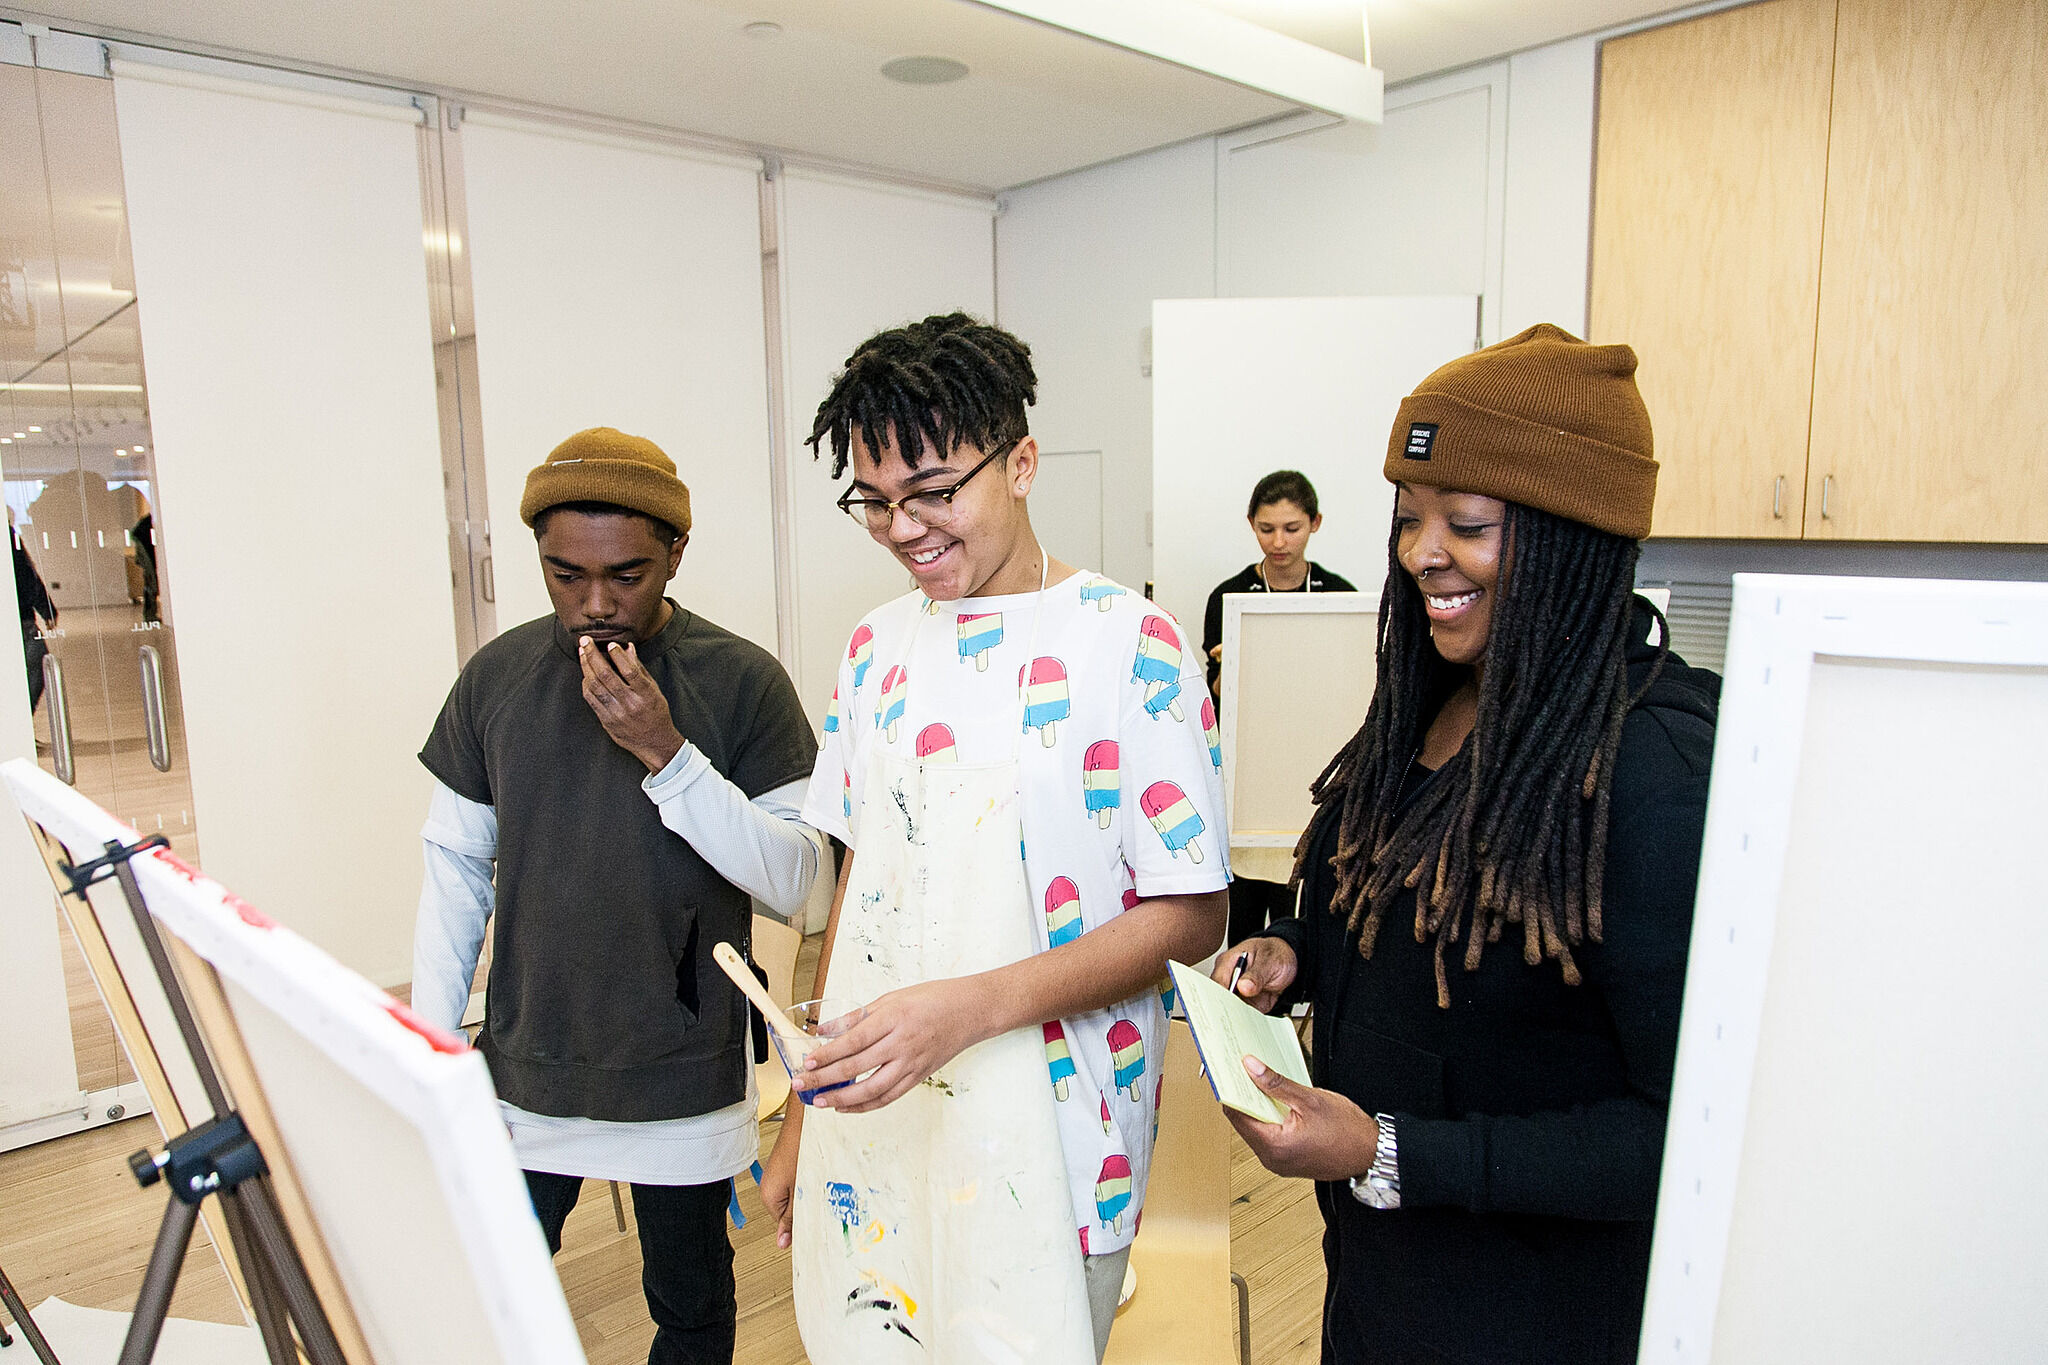 Artist and students stand in front of an easel.